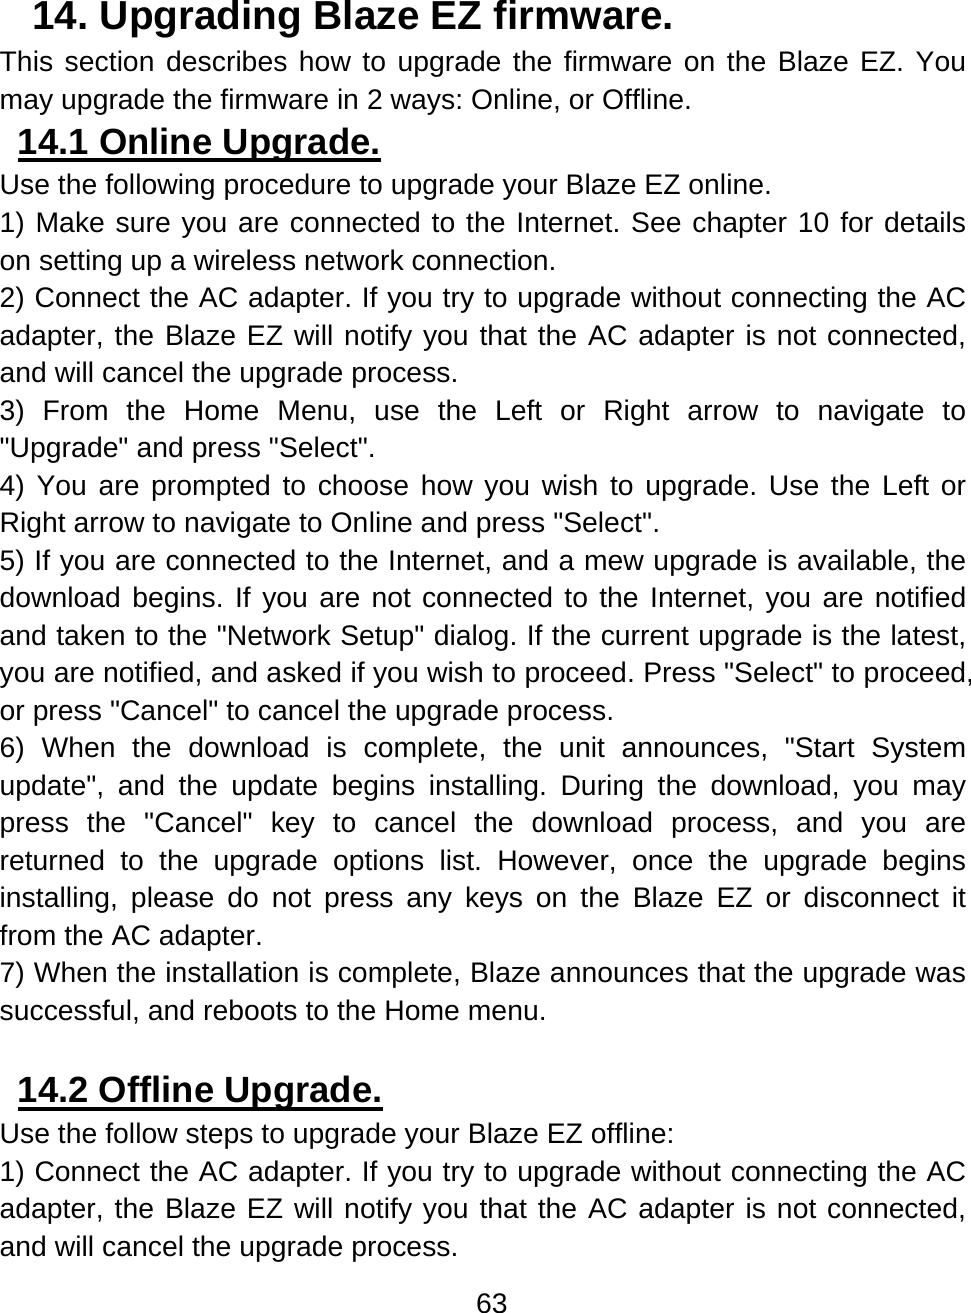 63  14. Upgrading Blaze EZ firmware.  This section describes how to upgrade the firmware on the Blaze EZ. You may upgrade the firmware in 2 ways: Online, or Offline. 14.1 Online Upgrade.  Use the following procedure to upgrade your Blaze EZ online.  1) Make sure you are connected to the Internet. See chapter 10 for details on setting up a wireless network connection. 2) Connect the AC adapter. If you try to upgrade without connecting the AC adapter, the Blaze EZ will notify you that the AC adapter is not connected, and will cancel the upgrade process. 3) From the Home Menu, use the Left or Right arrow to navigate to &quot;Upgrade&quot; and press &quot;Select&quot;. 4) You are prompted to choose how you wish to upgrade. Use the Left or Right arrow to navigate to Online and press &quot;Select&quot;.   5) If you are connected to the Internet, and a mew upgrade is available, the download begins. If you are not connected to the Internet, you are notified and taken to the &quot;Network Setup&quot; dialog. If the current upgrade is the latest, you are notified, and asked if you wish to proceed. Press &quot;Select&quot; to proceed, or press &quot;Cancel&quot; to cancel the upgrade process. 6) When the download is complete, the unit announces, &quot;Start System update&quot;, and the update begins installing. During the download, you may press the &quot;Cancel&quot; key to cancel the download process, and you are returned to the upgrade options list. However, once the upgrade begins installing, please do not press any keys on the Blaze EZ or disconnect it from the AC adapter.    7) When the installation is complete, Blaze announces that the upgrade was successful, and reboots to the Home menu.  14.2 Offline Upgrade.  Use the follow steps to upgrade your Blaze EZ offline: 1) Connect the AC adapter. If you try to upgrade without connecting the AC adapter, the Blaze EZ will notify you that the AC adapter is not connected, and will cancel the upgrade process. 